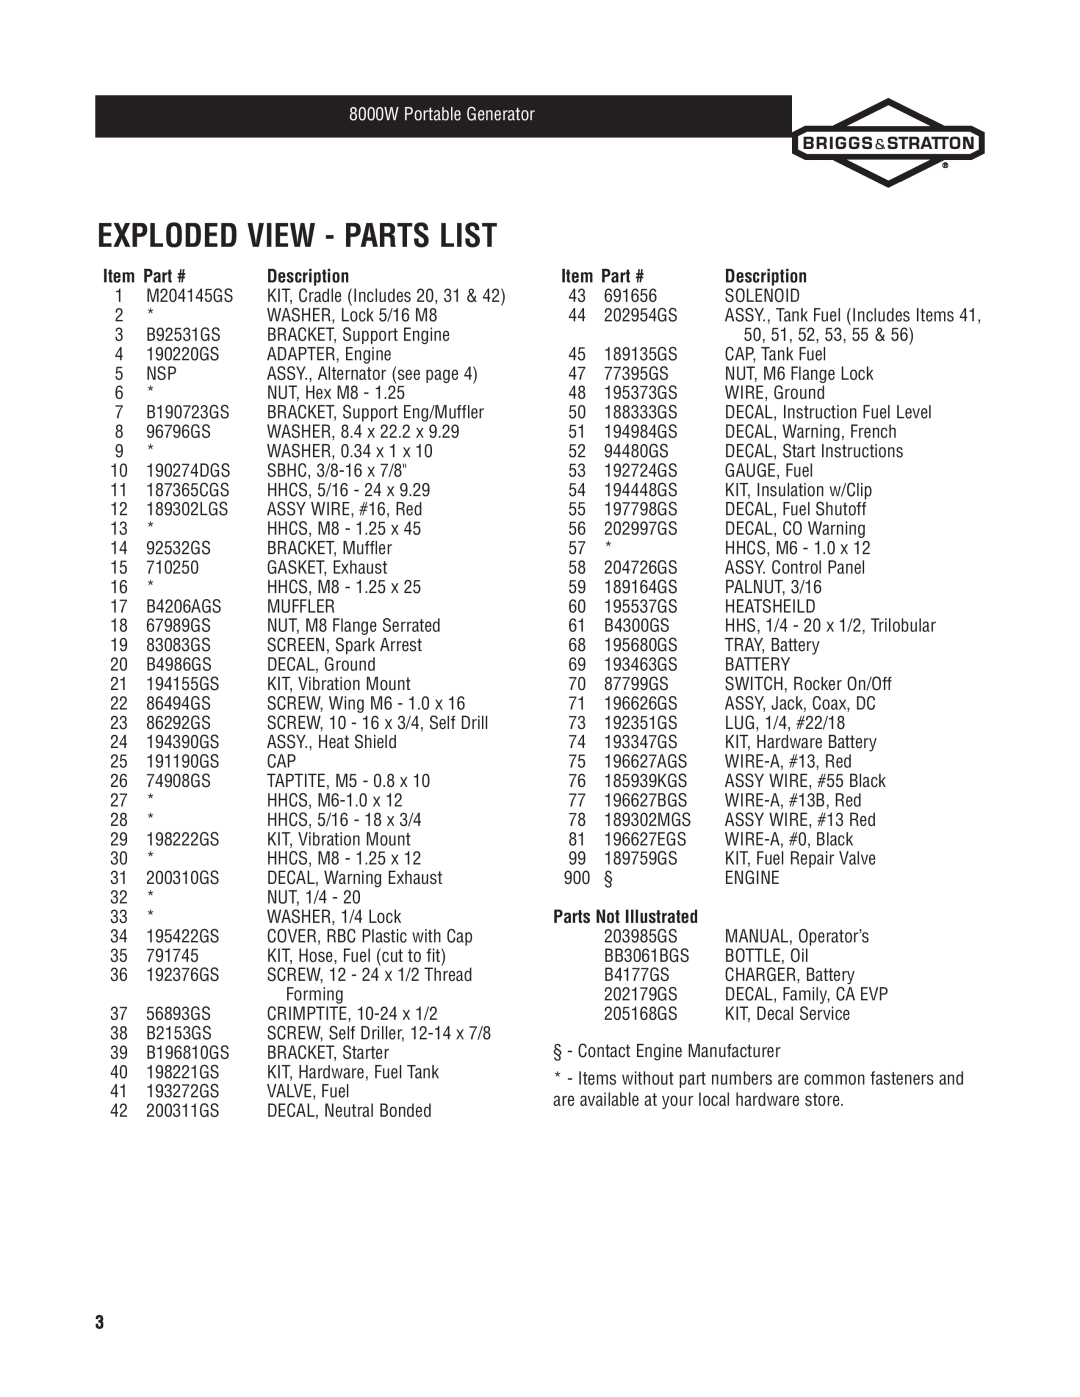 Briggs & Stratton 30334 manual Exploded View - Parts List, Description, Parts Not Illustrated, 8000W Portable Generator 